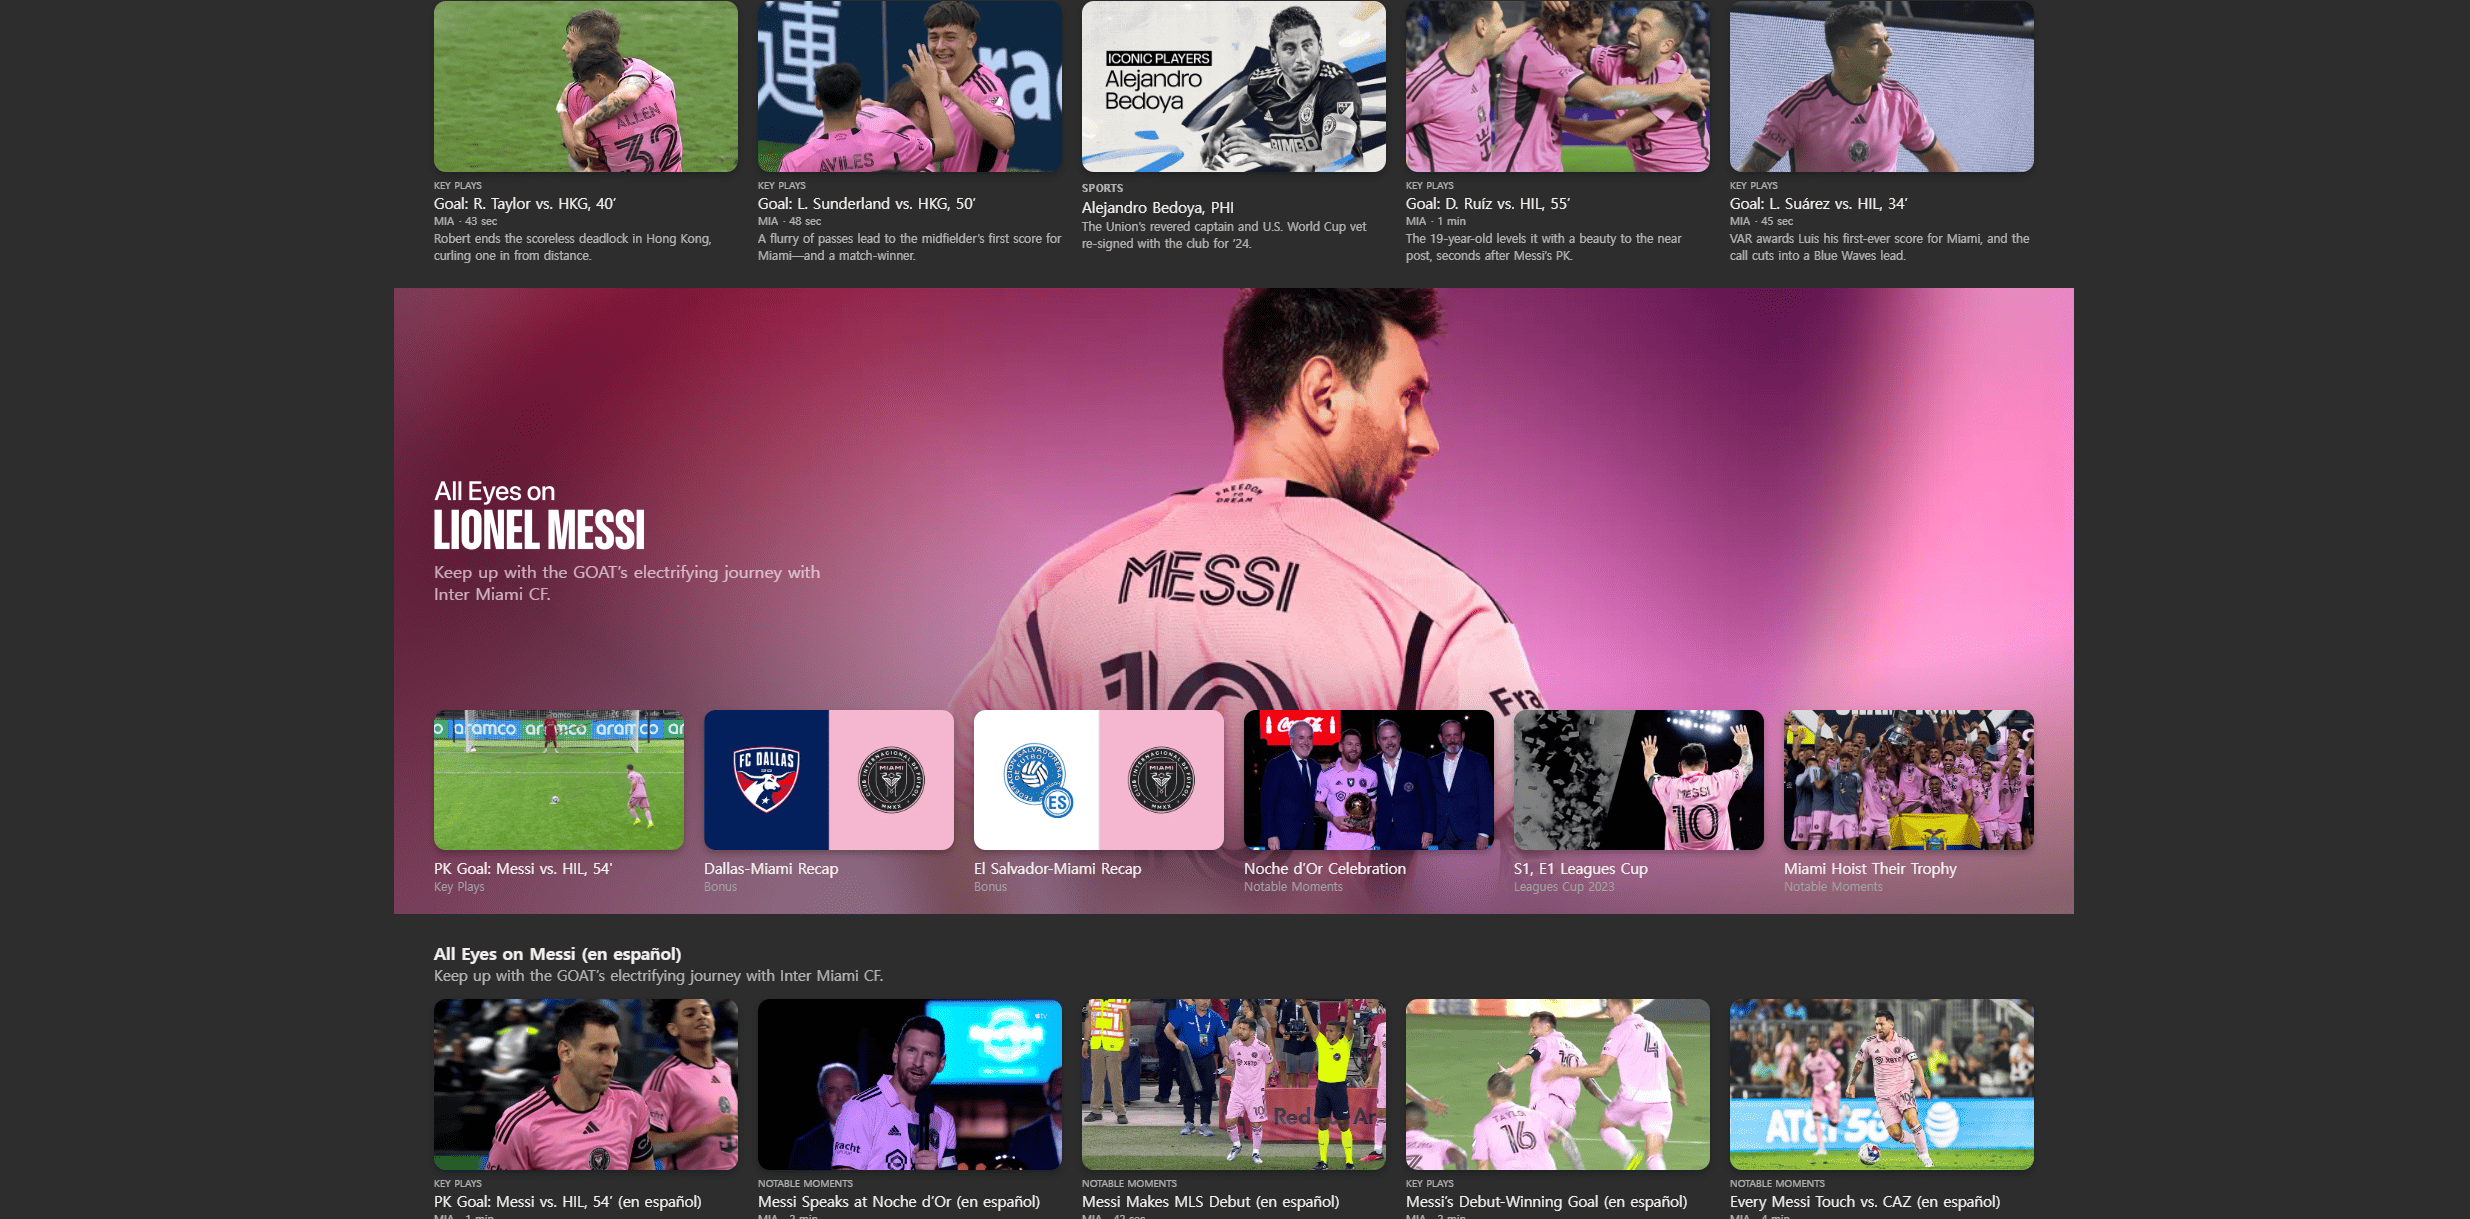 Lionel Messi in this image from Apple TV